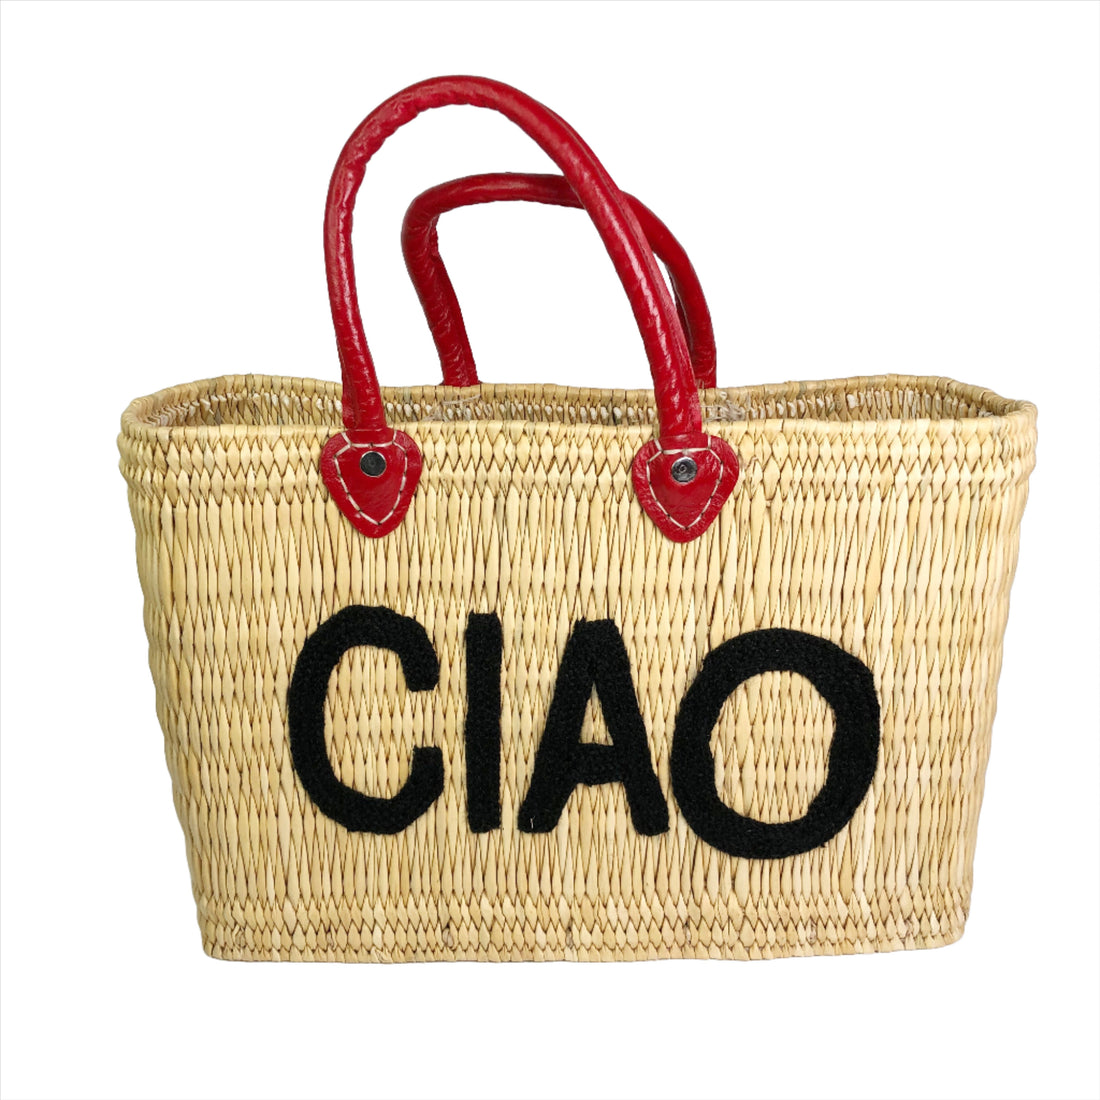 Lilliana CIAO Bag with Red Handles